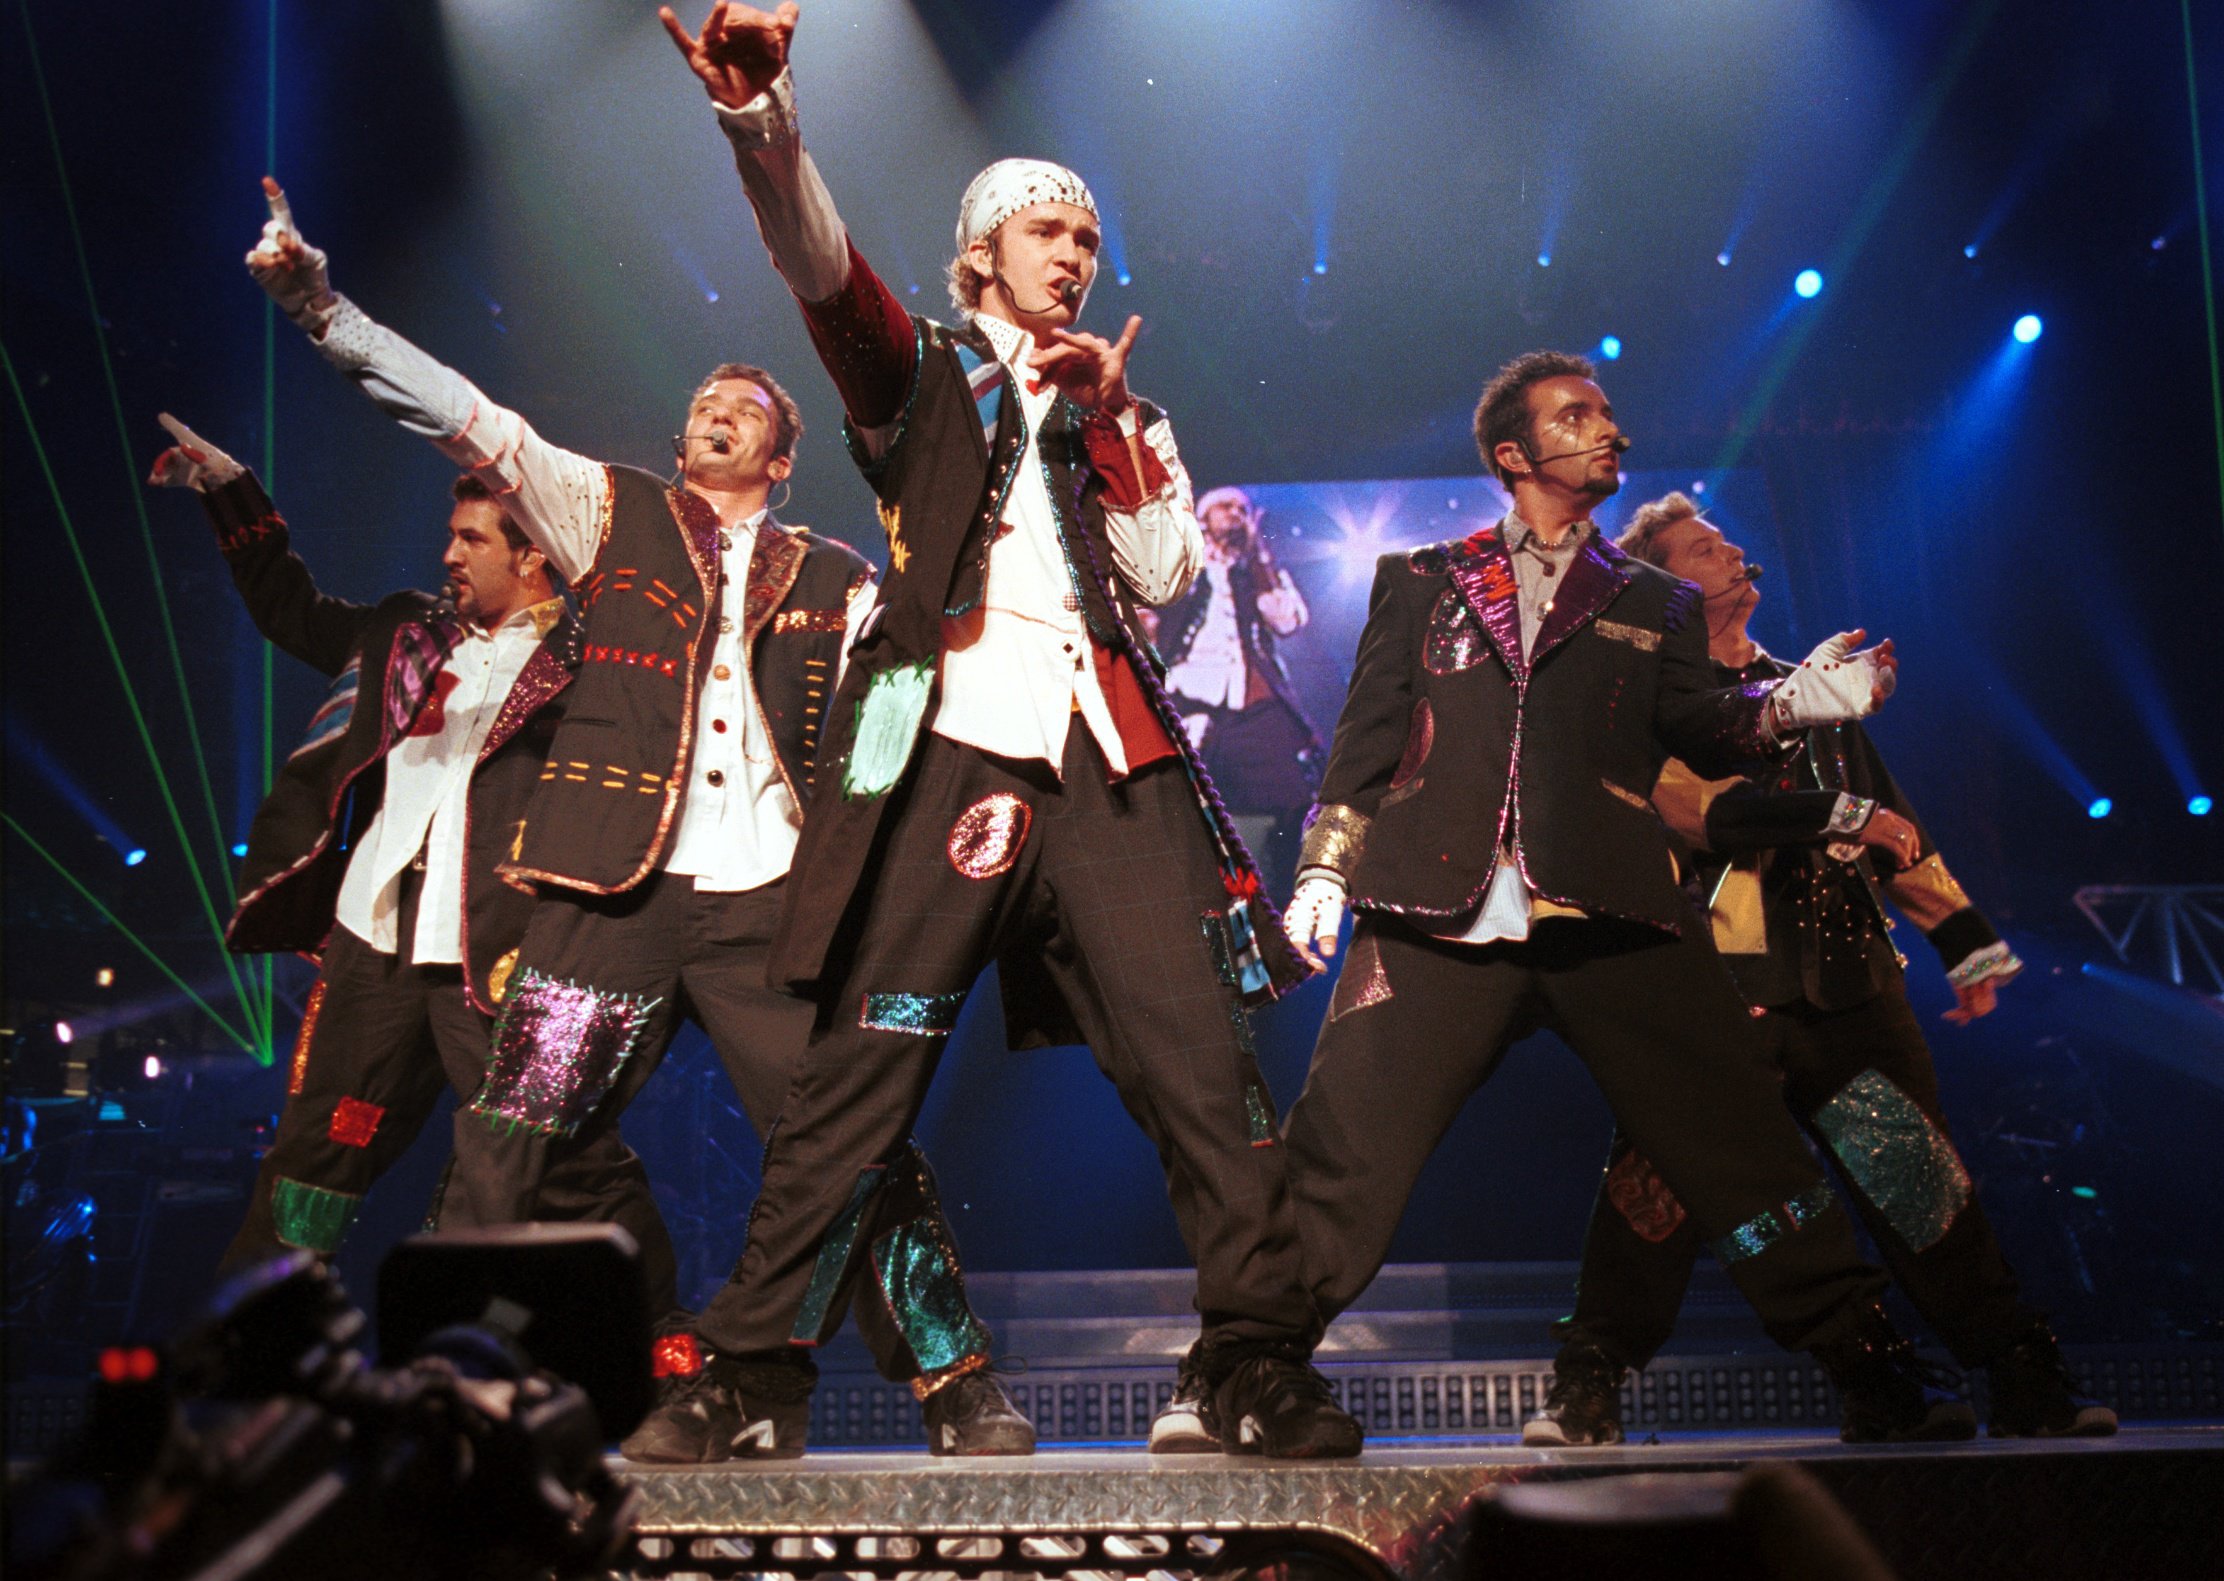 *NSYNC performing at Madison Square Garden in 2000